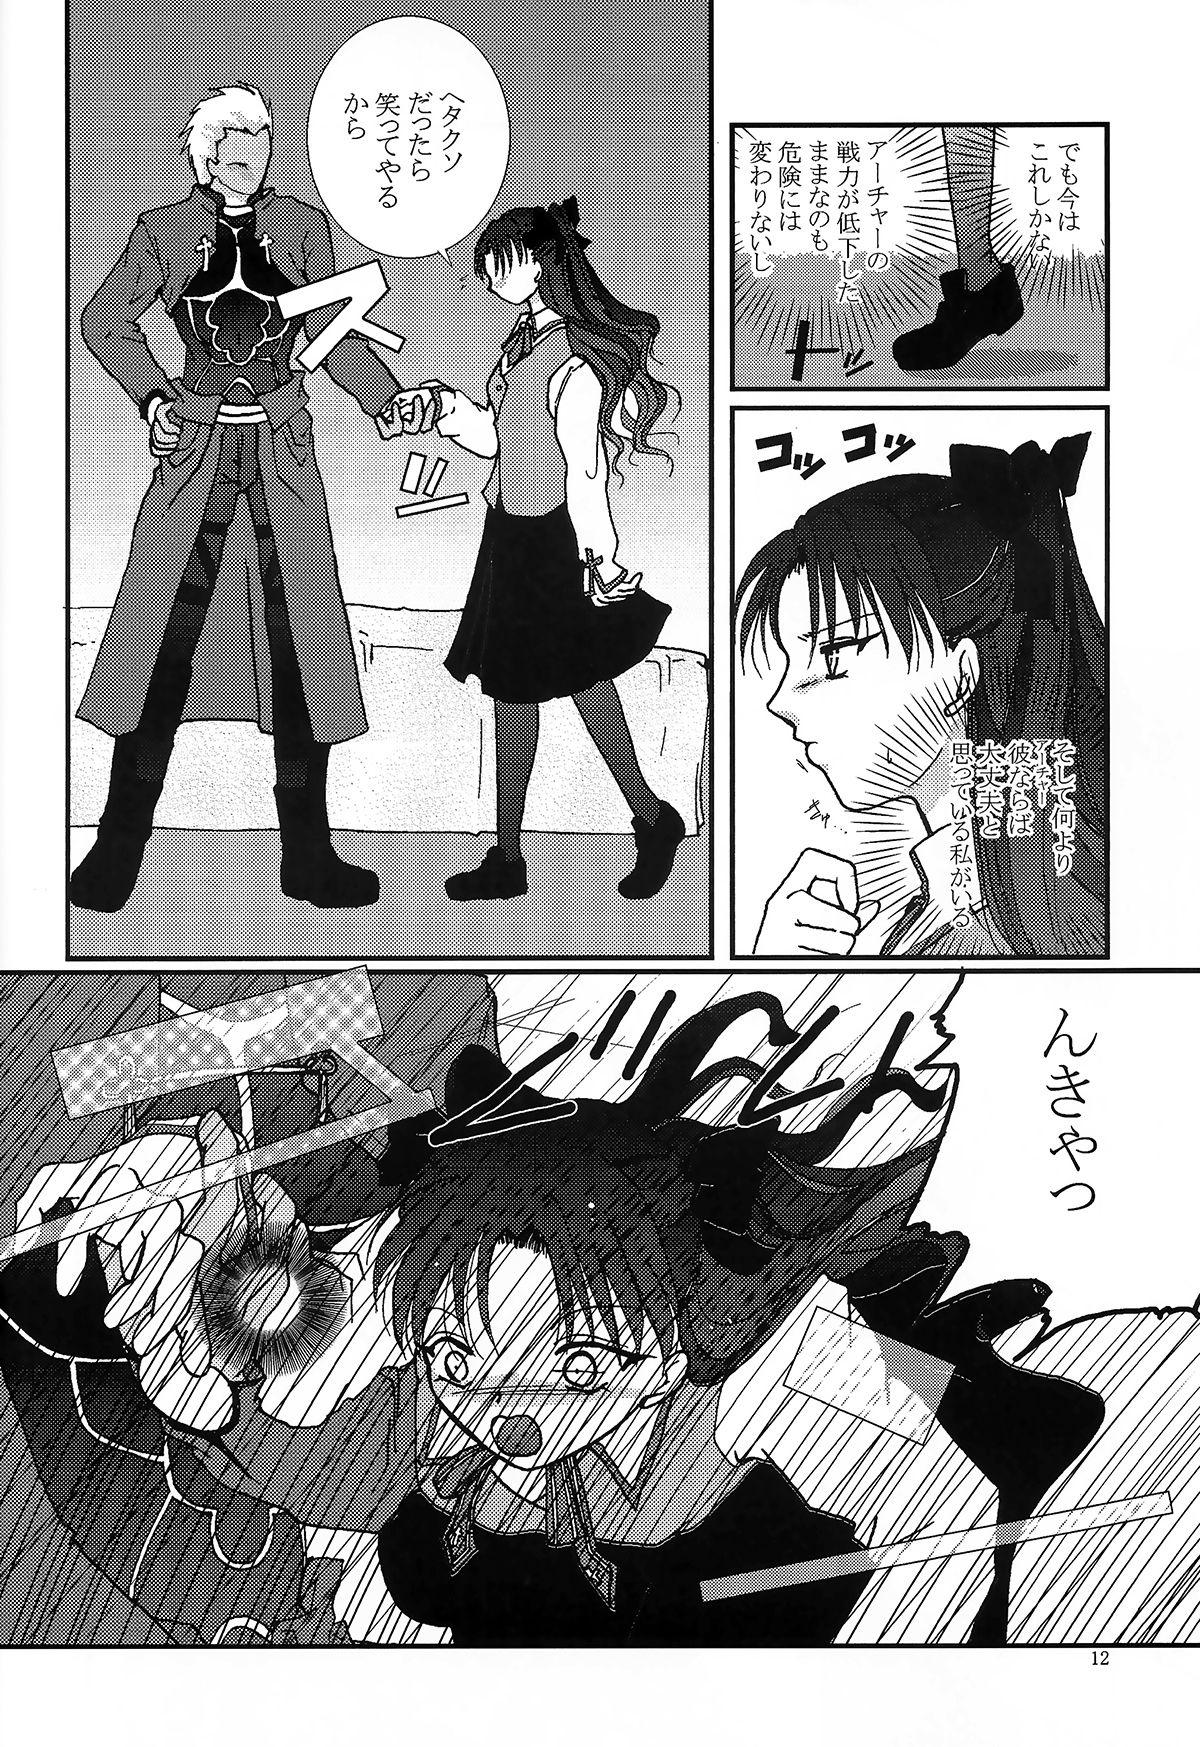 Oil Question-7 - Fate stay night Women Sucking Dicks - Page 10